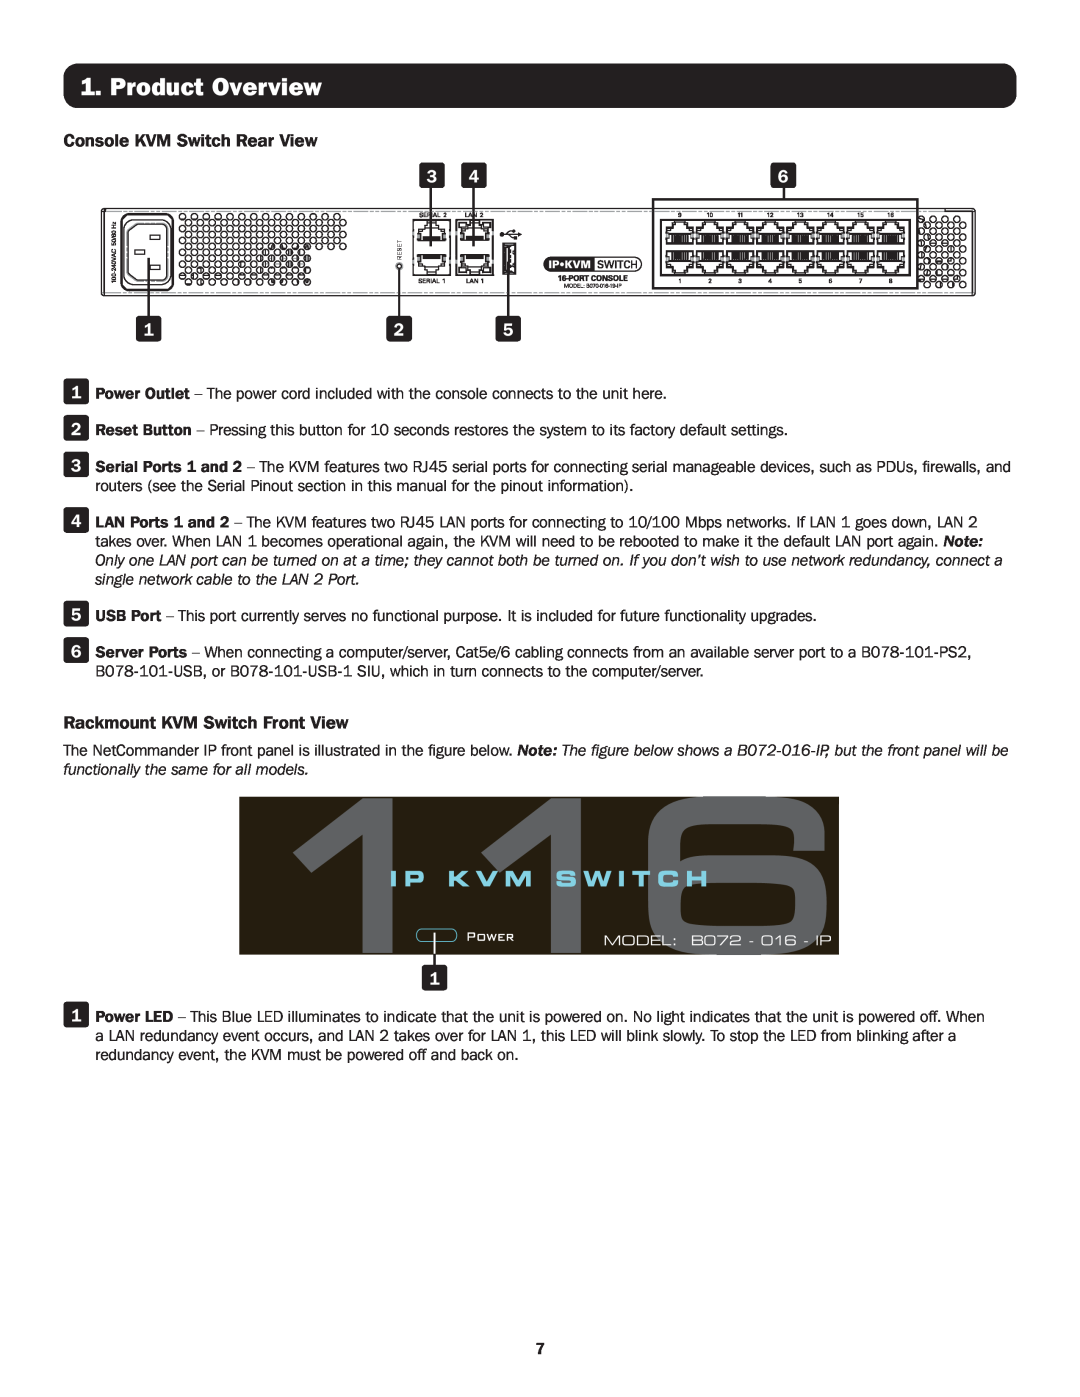 Tripp Lite B070-008-19-IP, B072-016-IP Console KVM Switch Rear View, Rackmount KVM Switch Front View, Product Overview 